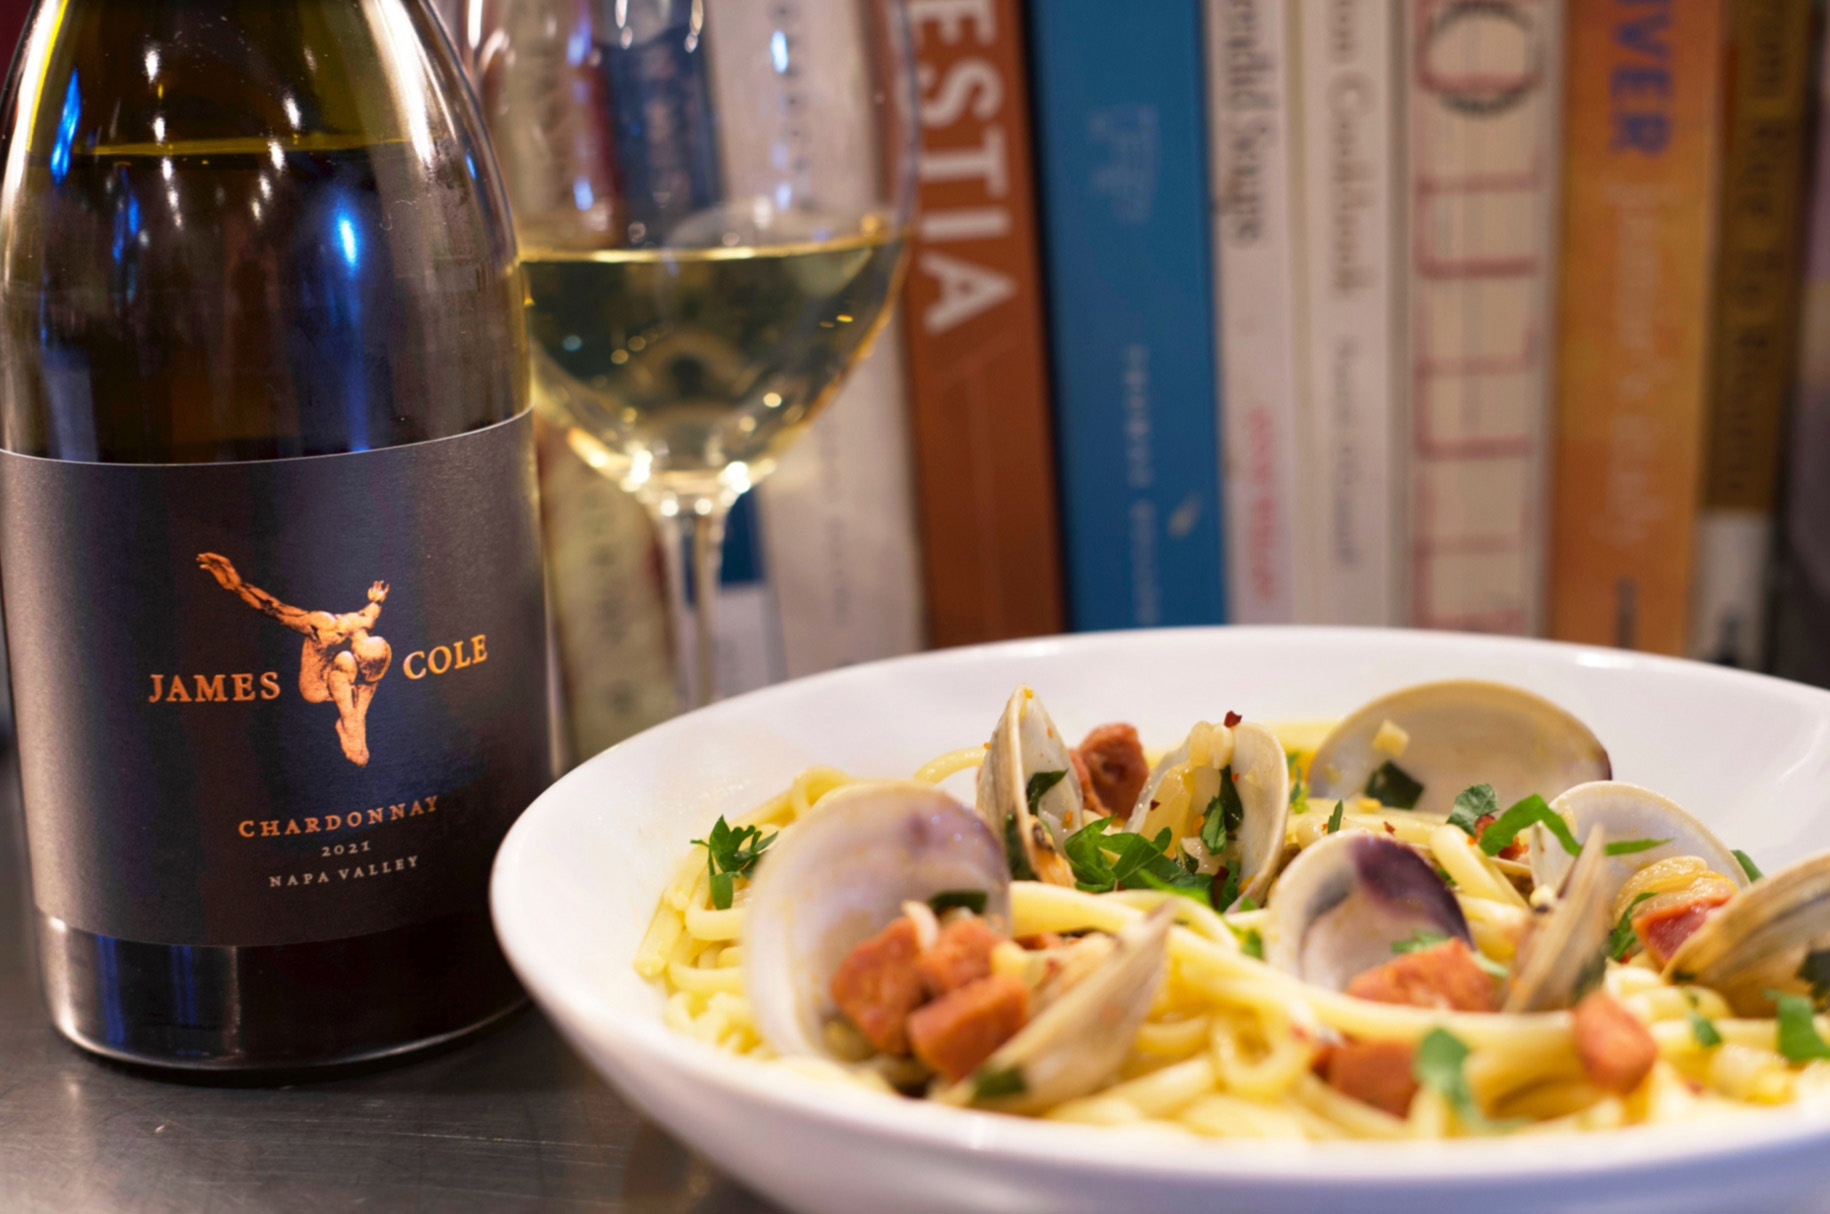 Linguini with Clams paired with James Cole Chardonnay